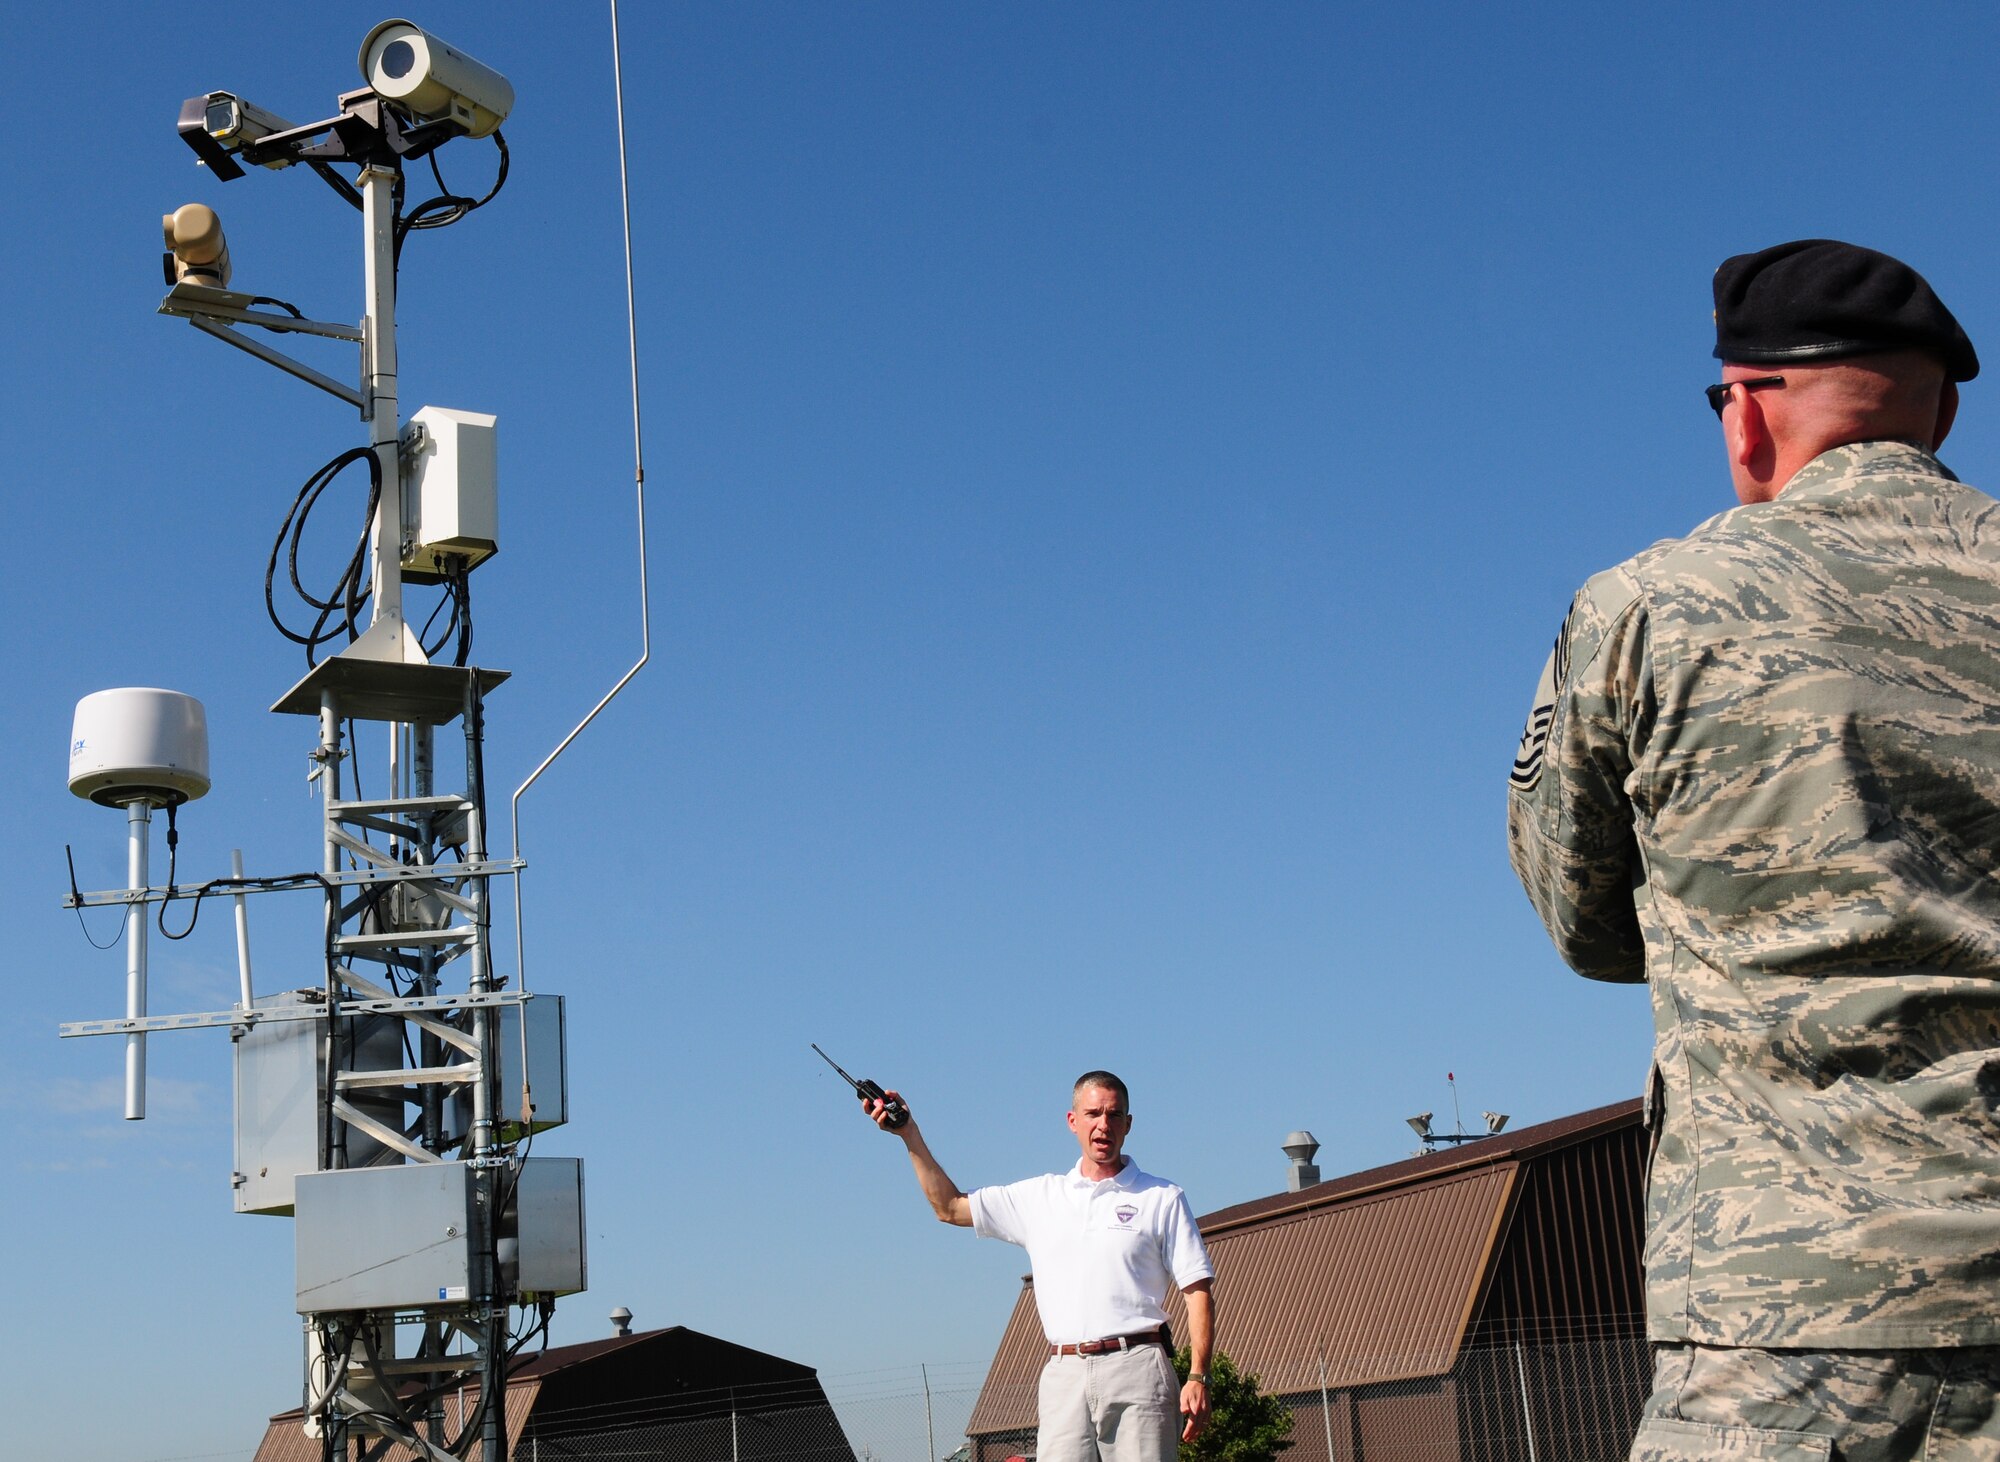 SPANGDAHELM AIR BASE, Germany – David Dykes, Joint Force Protection Advanced Security System team member, provides tower information to Chief Master Sgt. Kevin Peters, U.S. Air Forces in Europe Security Forces Manager, during a site tour of key components of the JFPASS Aug. 20.  The system integrates advanced technology including Smart Car-sized robots, cameras, software and motion sensors with existing technology to increase force protection capabilities. (U.S. Air Force photo/Staff Sgt. Heather M. Norris)